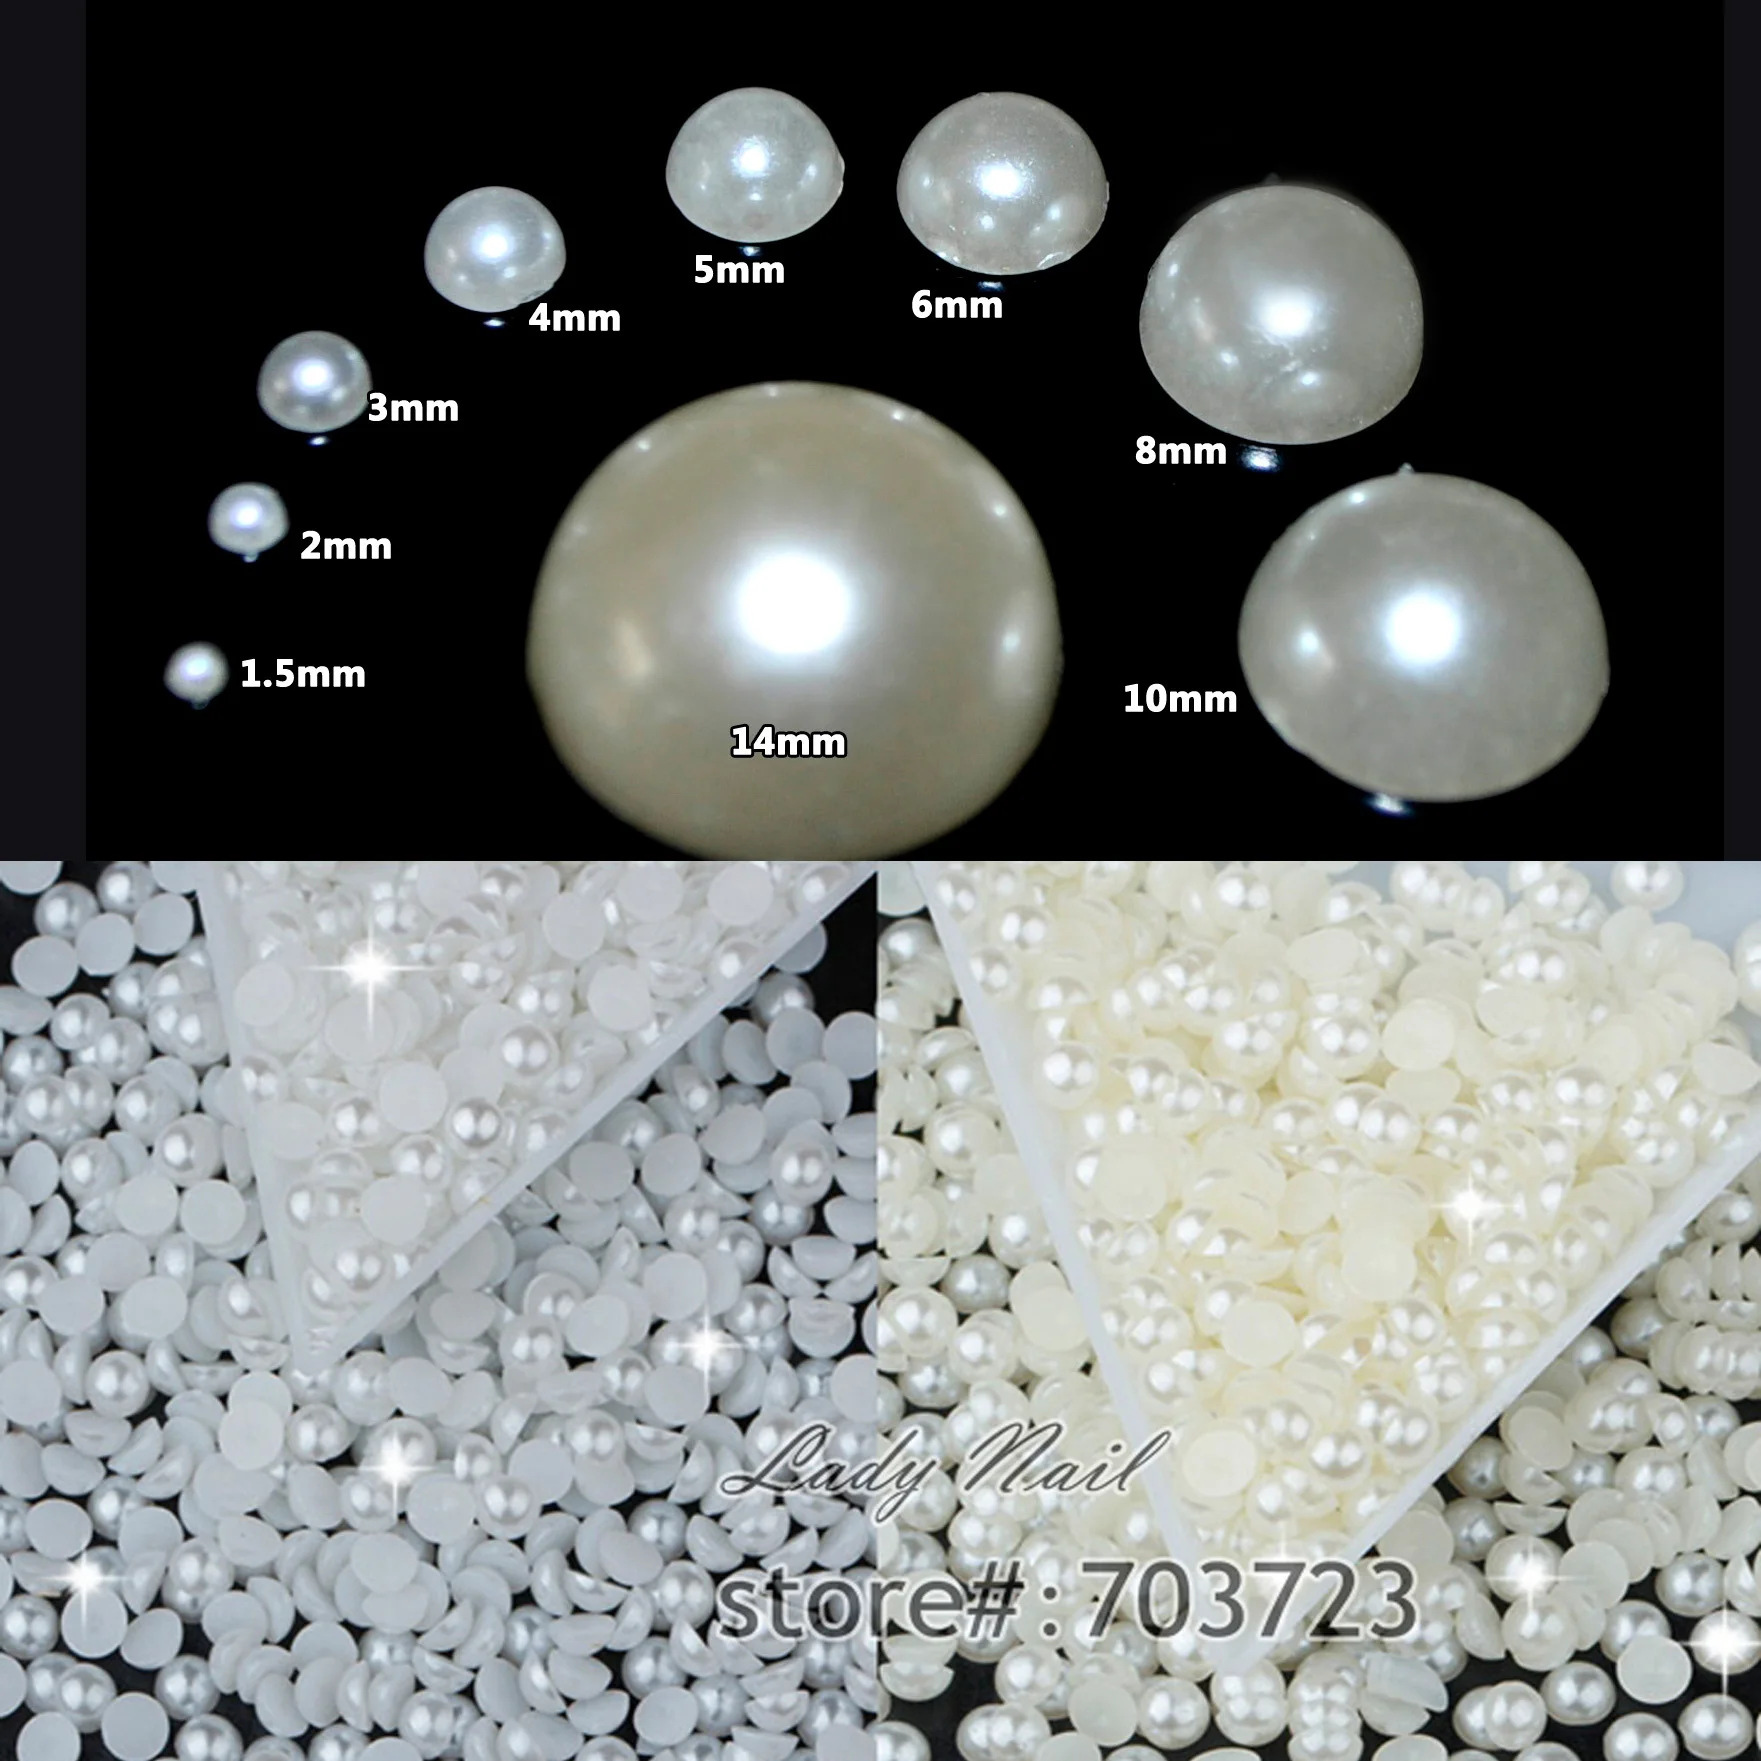 White Half Round Flatback Pearls 1.5mm 2mm 3mm 4mm 5mm 6mm 8mm 10mm 14mm for - £7.09 GBP